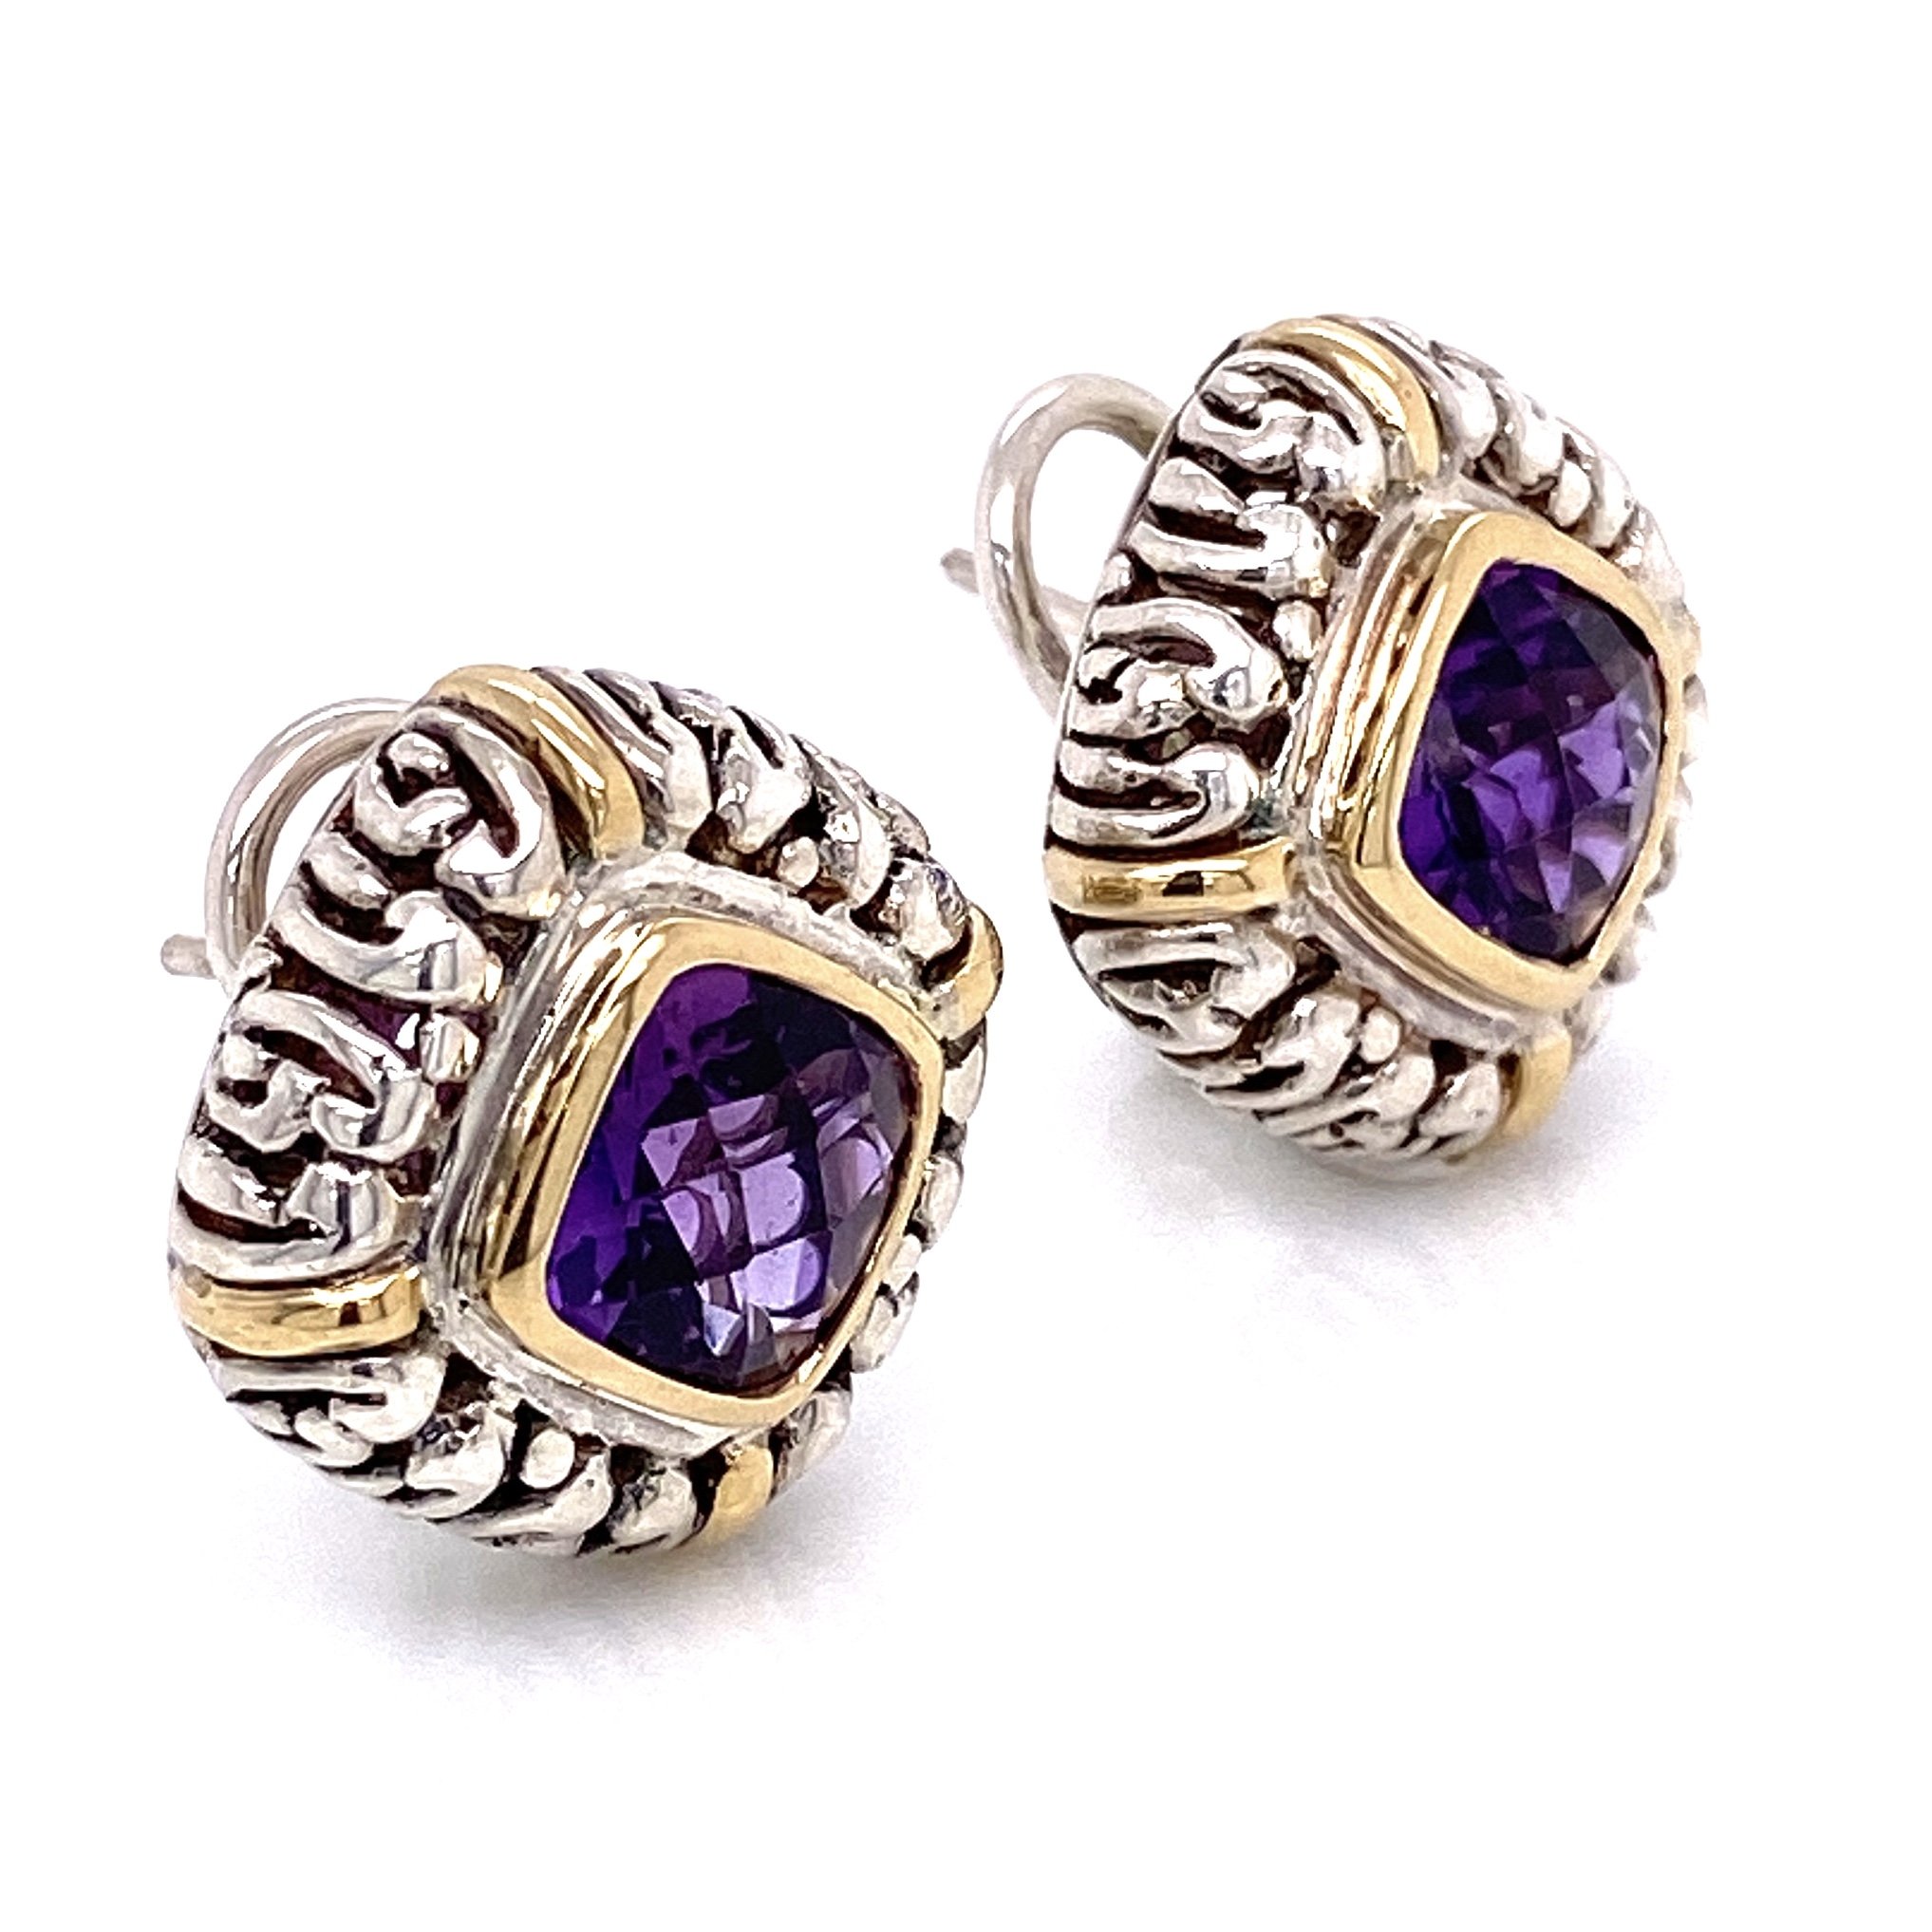 18K & 925 Sterling Cushion Amethyst Earrings with French Clips 12.2g